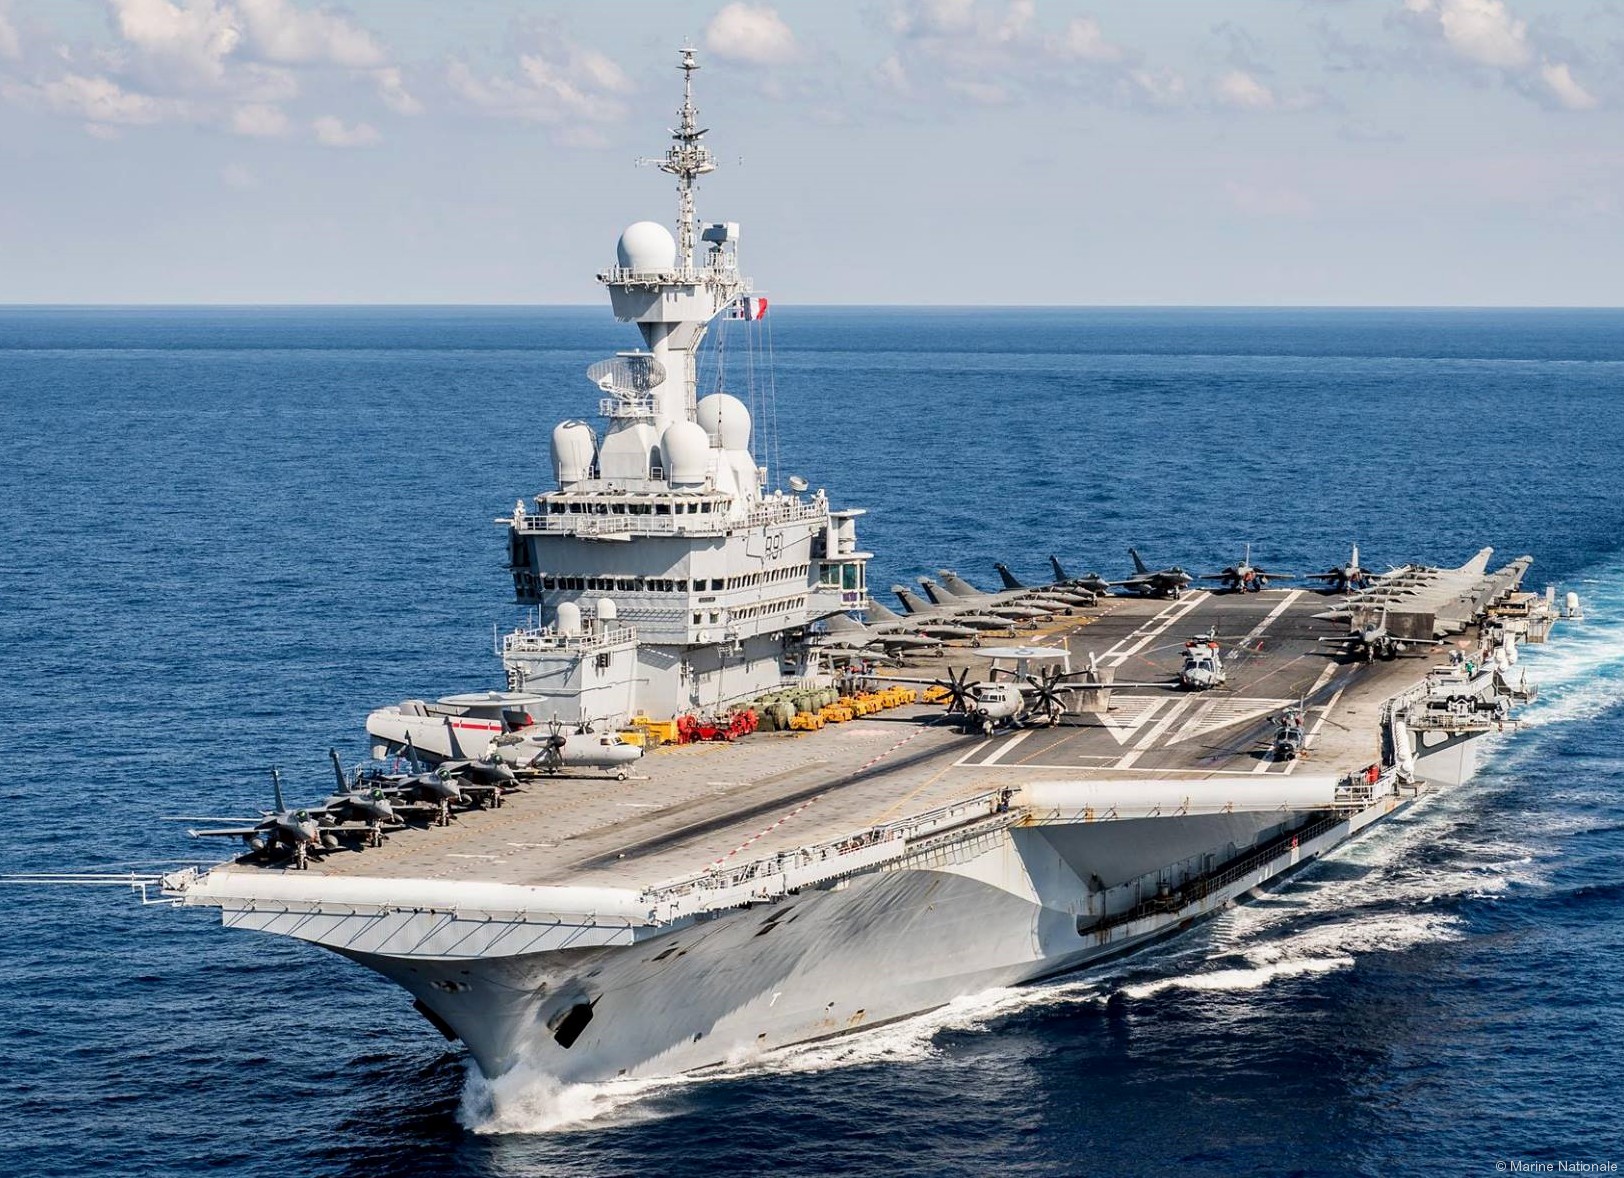 r-91 fs charles de gaulle aircraft carrier french navy 02 marine nationale